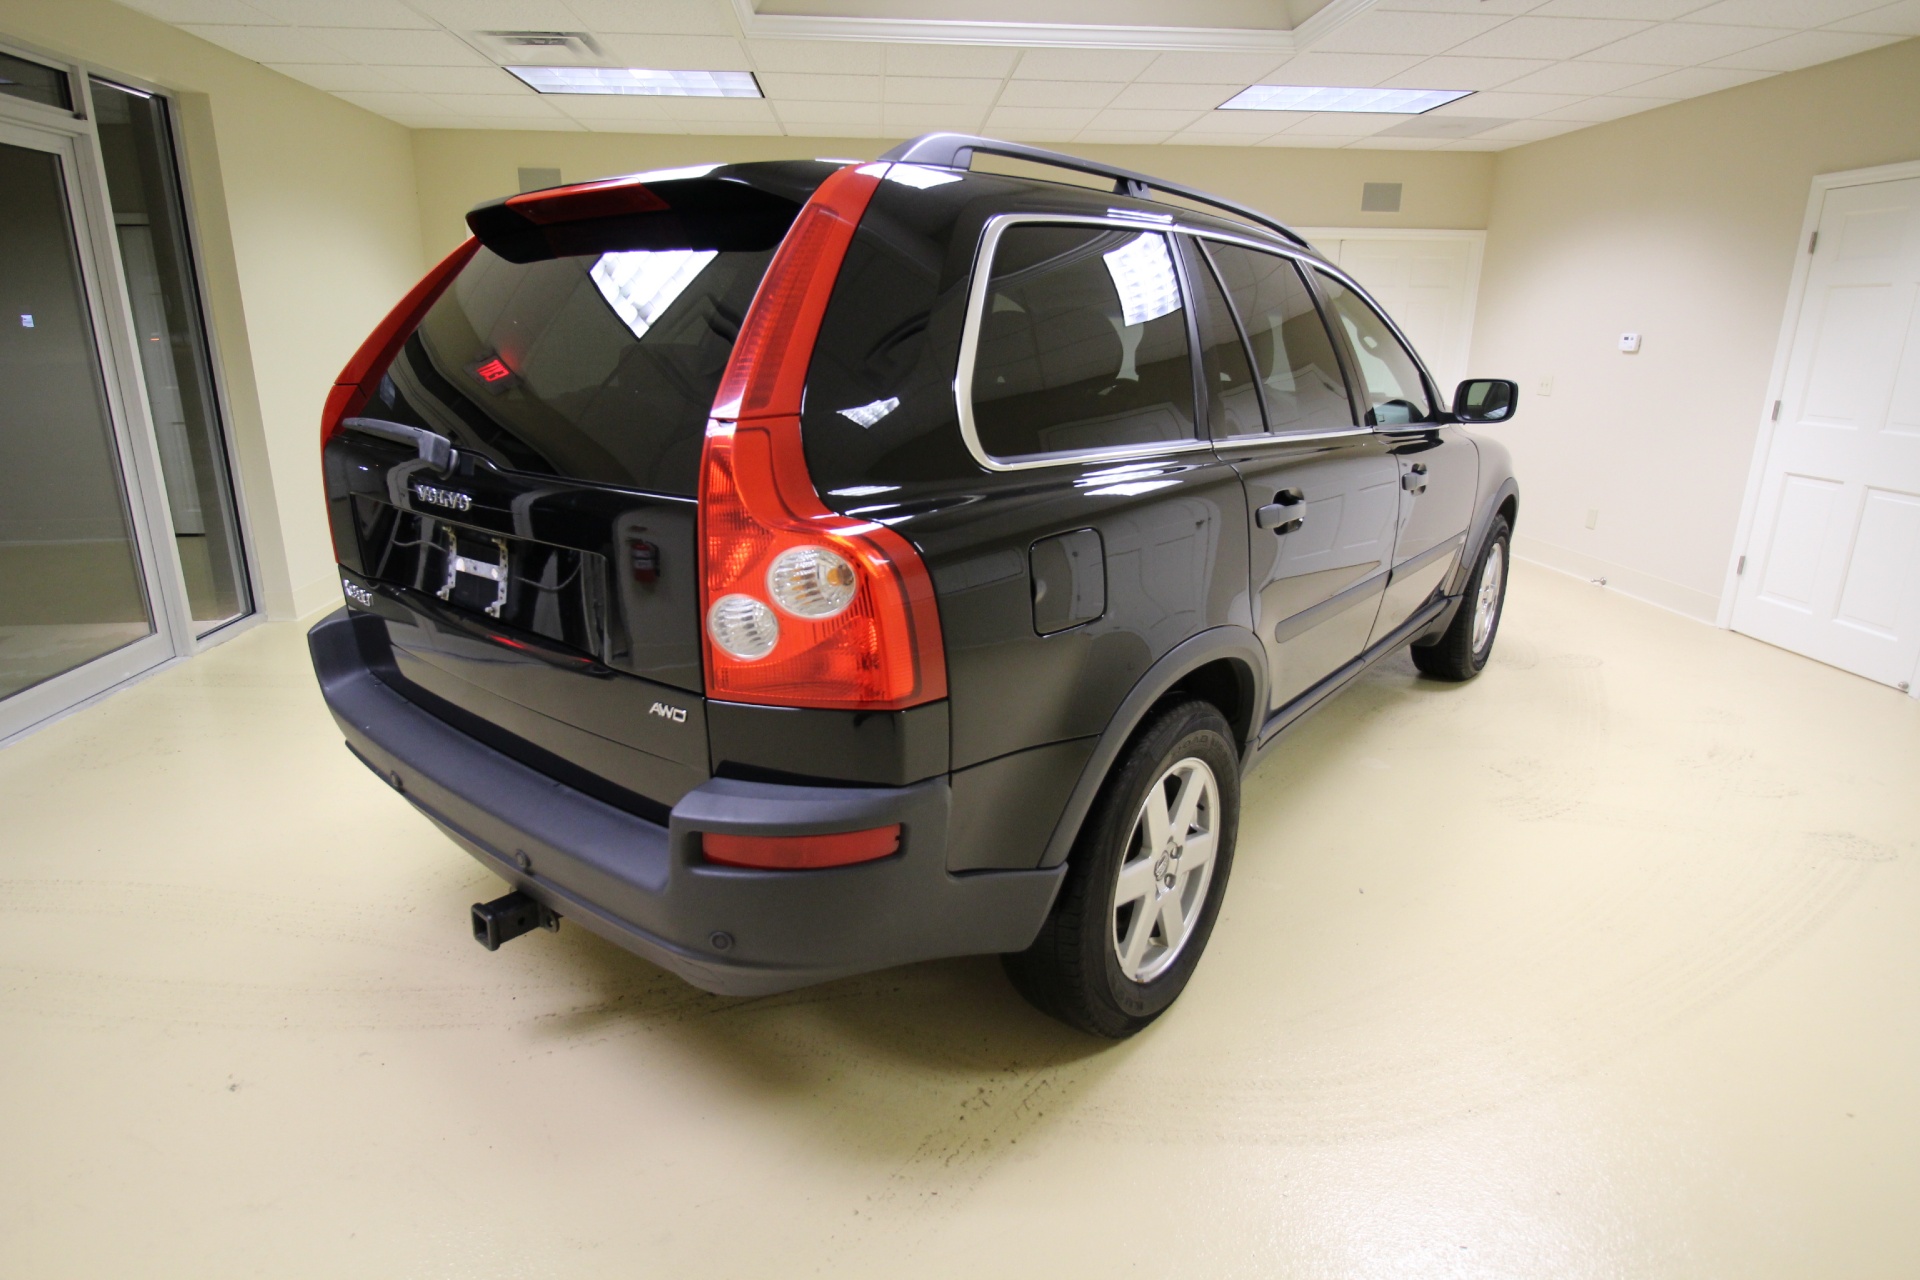 Used 2006 Black Volvo XC90 2.5T AWD LEATHER,SUNROOF,HEATED SEATS,REAR ENTERTAINMENT 2 TV'S DVD | Albany, NY